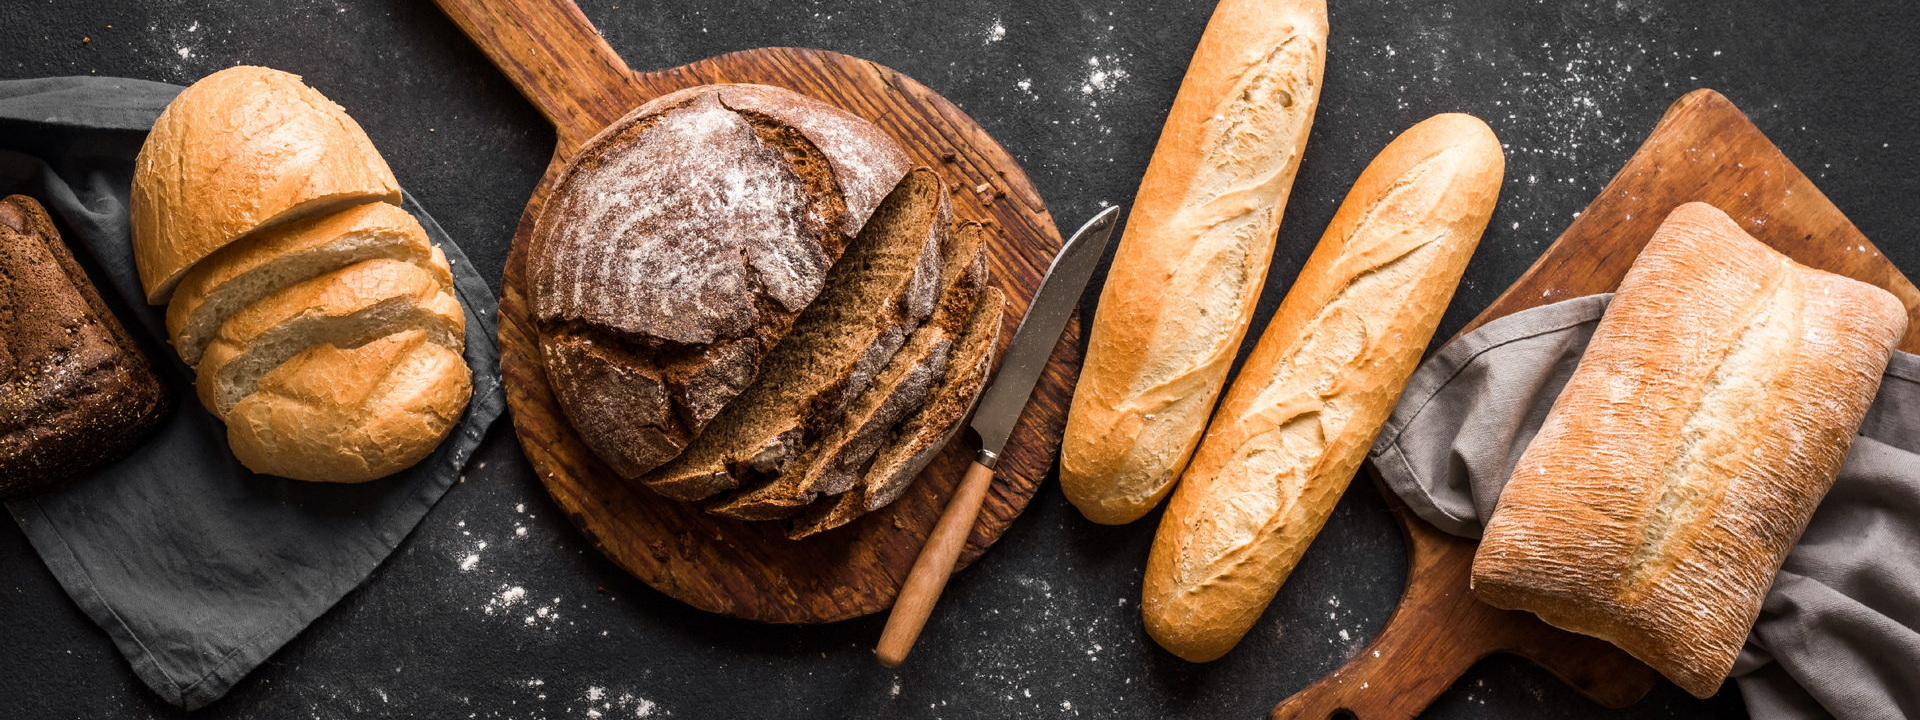 Fresh,Bread,On,Black,Background,,Top,View,,Copy,Space.,Homemade